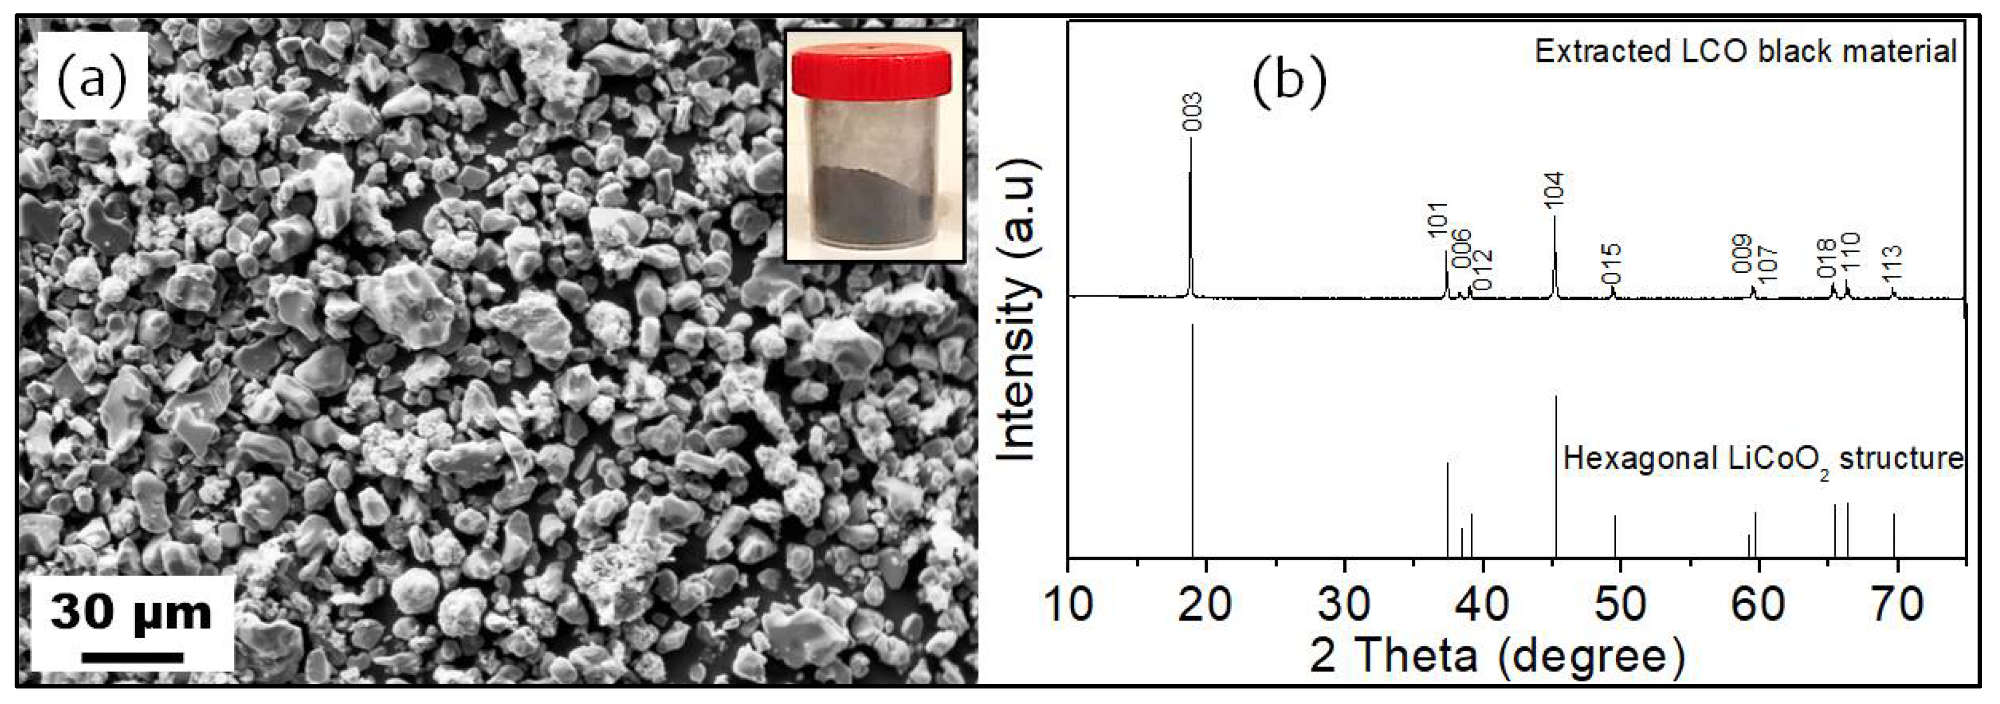 SEM image (a) and XRD pattern (b) of the extracted BM. The inset of figure (a) is a digital photograph of the extracted BM.